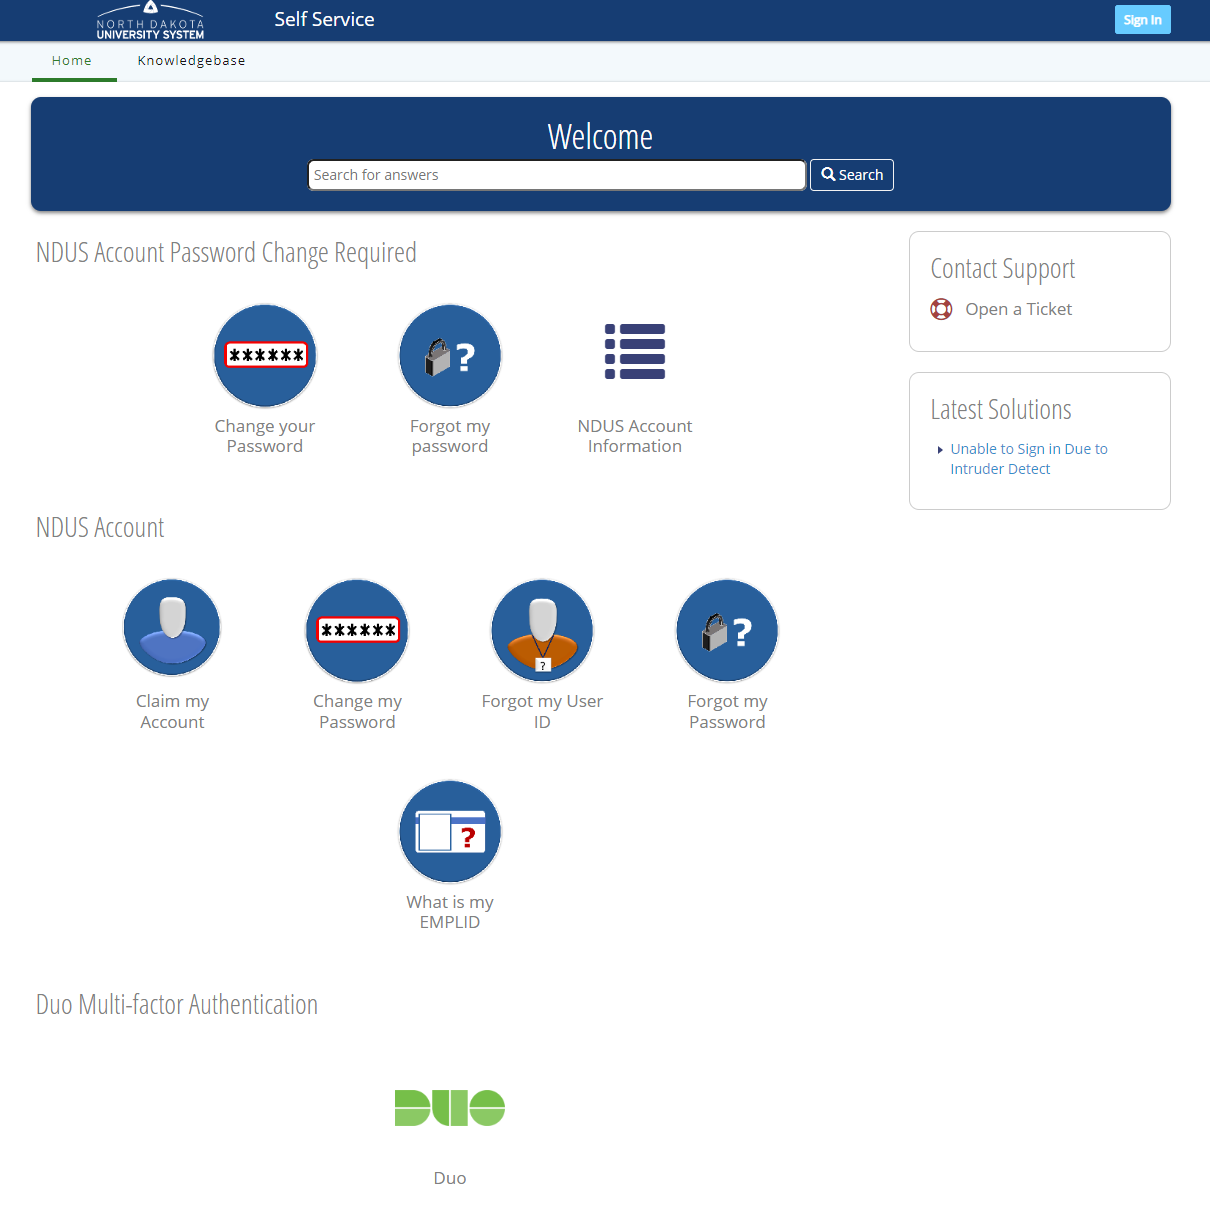 Image shows the home page of NDUS Self-Service